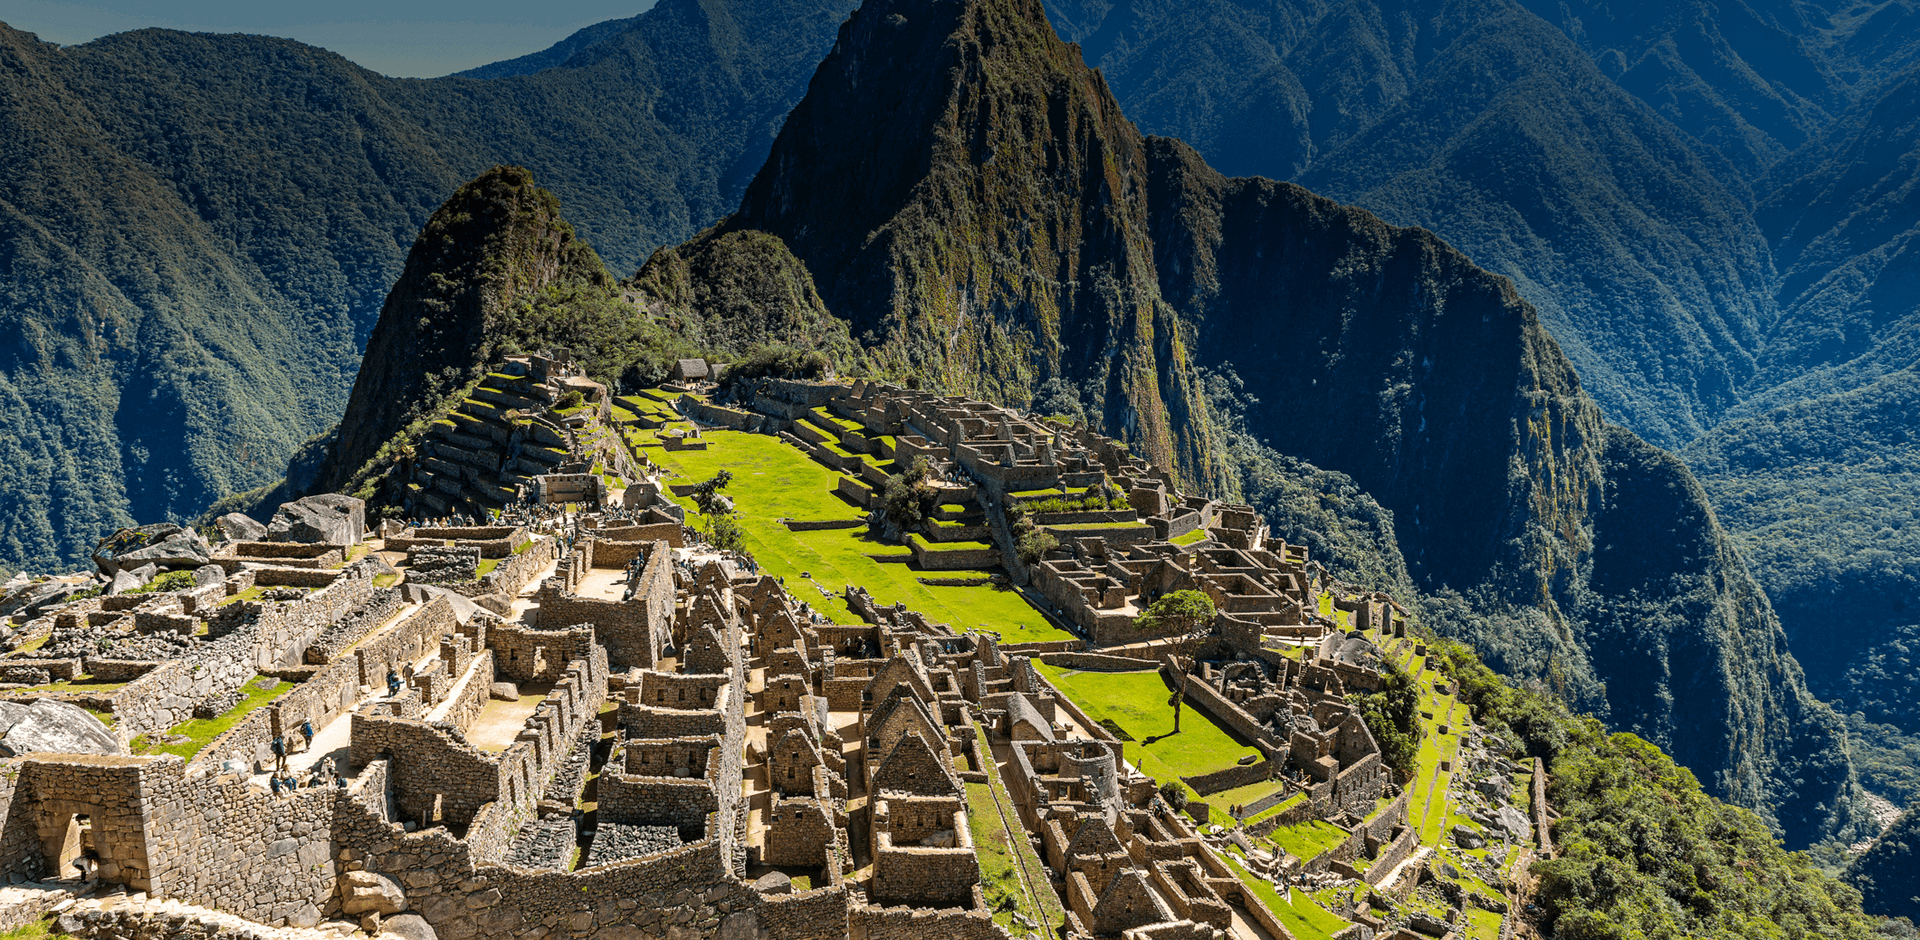 Overlooking from the top of Machu Picchu Inca Ruins and green mountains, Peru, South America.